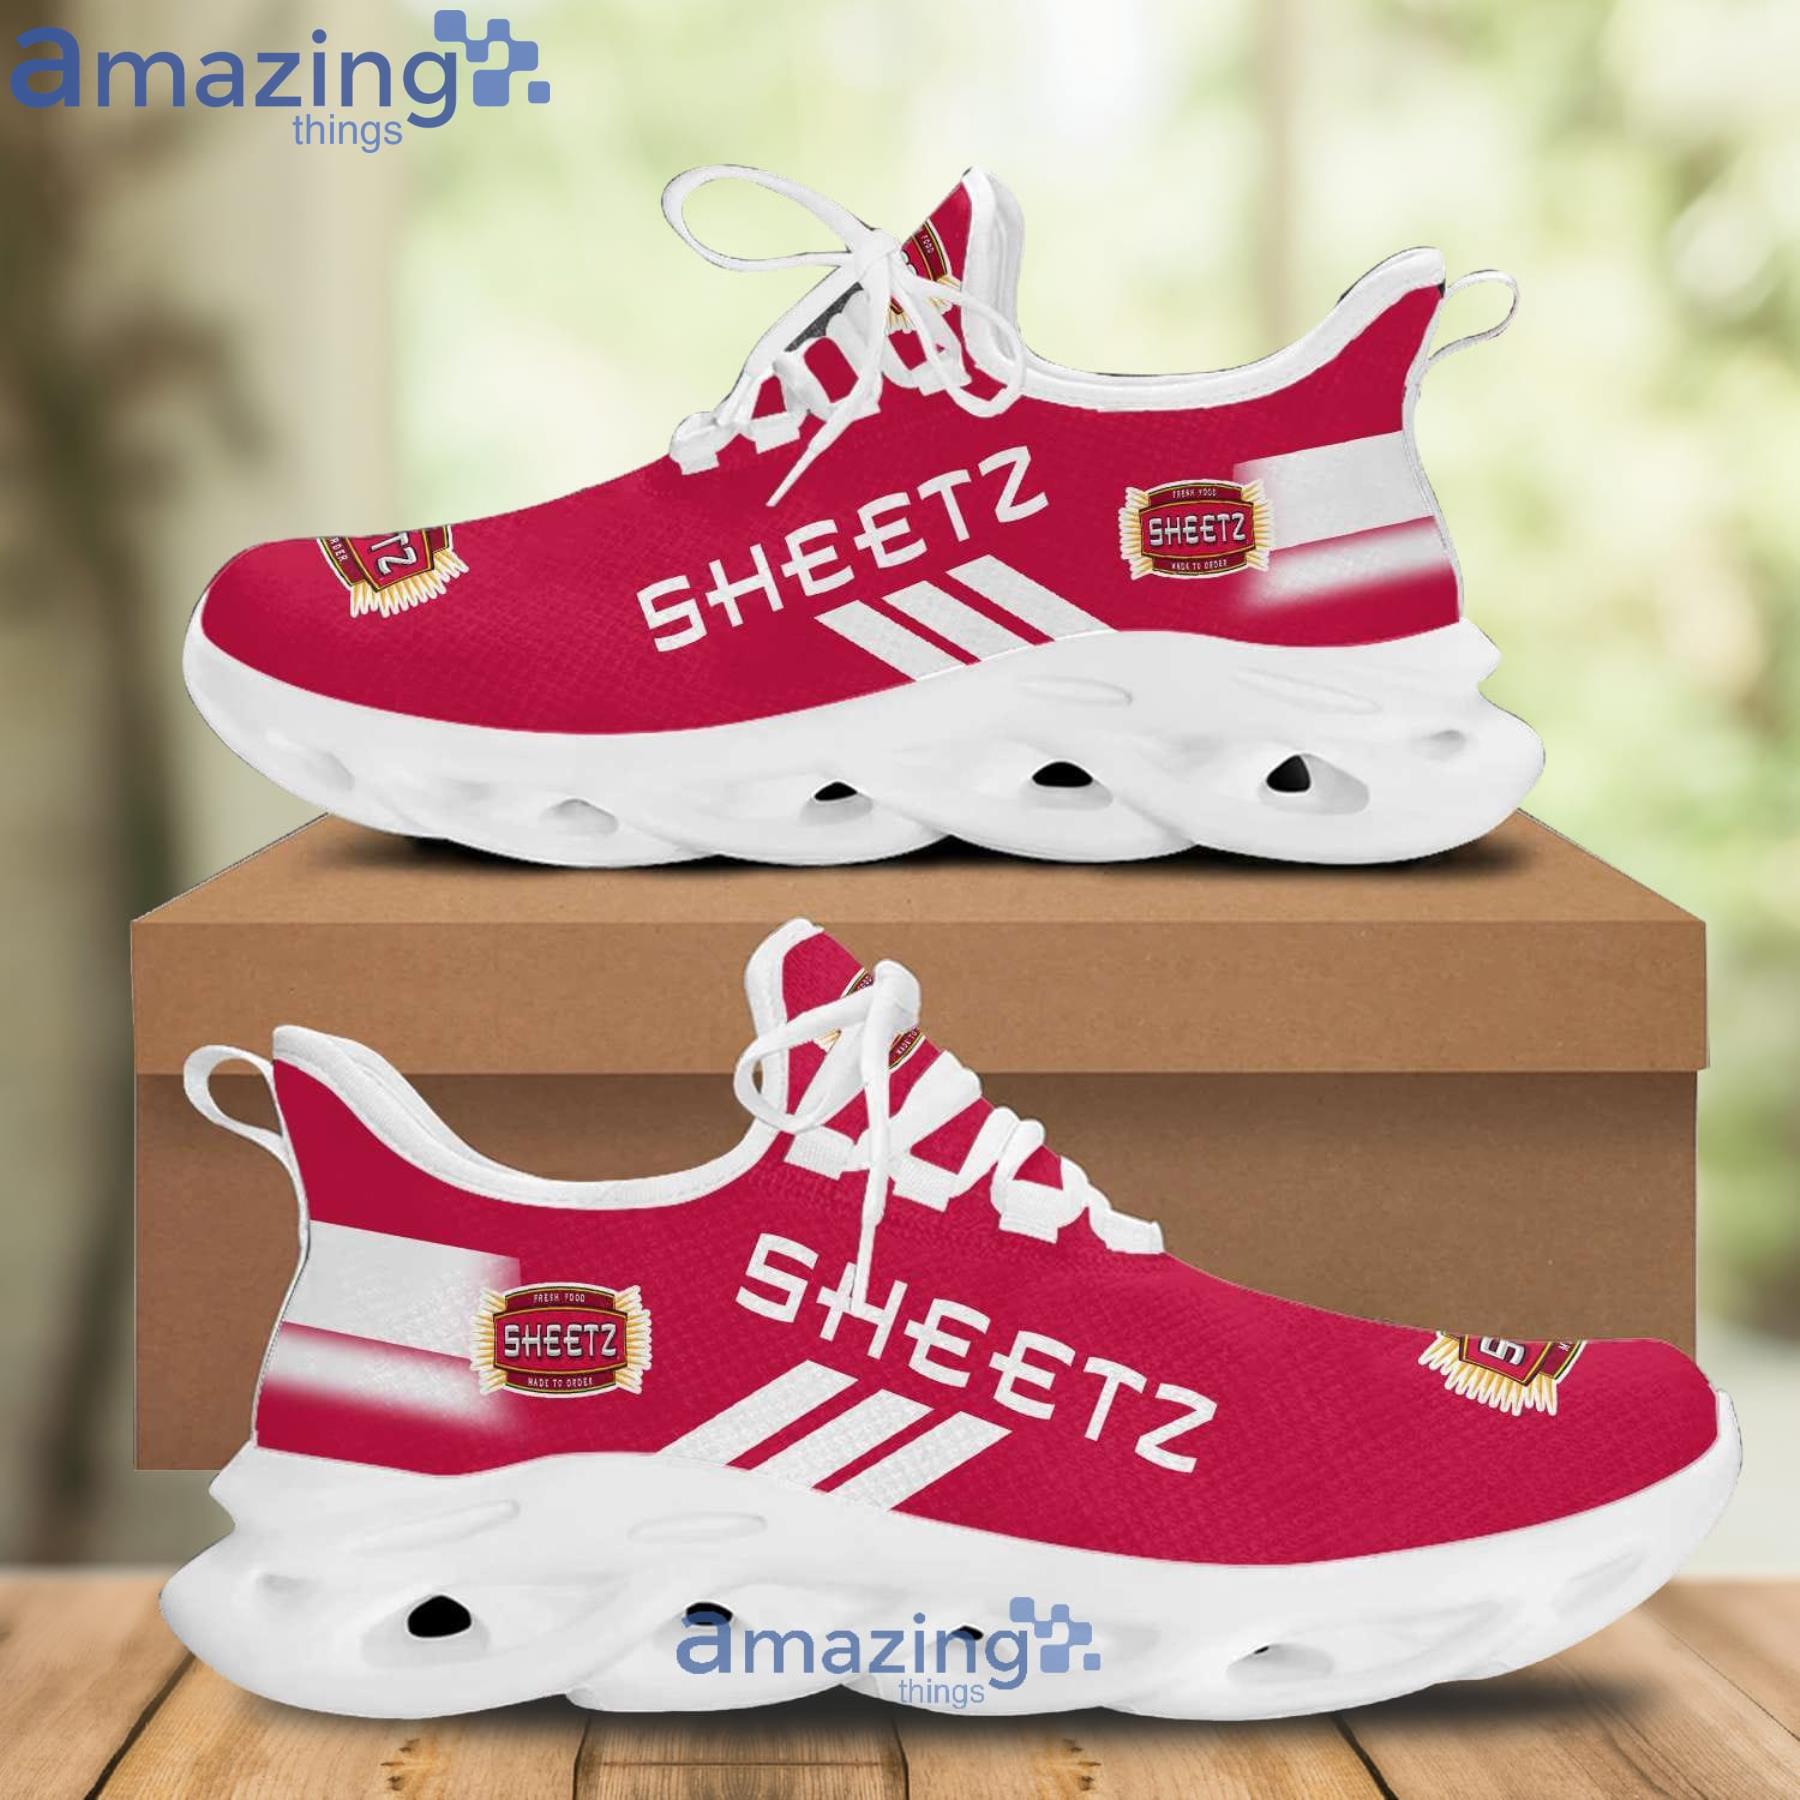 Boston Red Sox Striped Custom Name Max Soul Sneaker Running Shoes